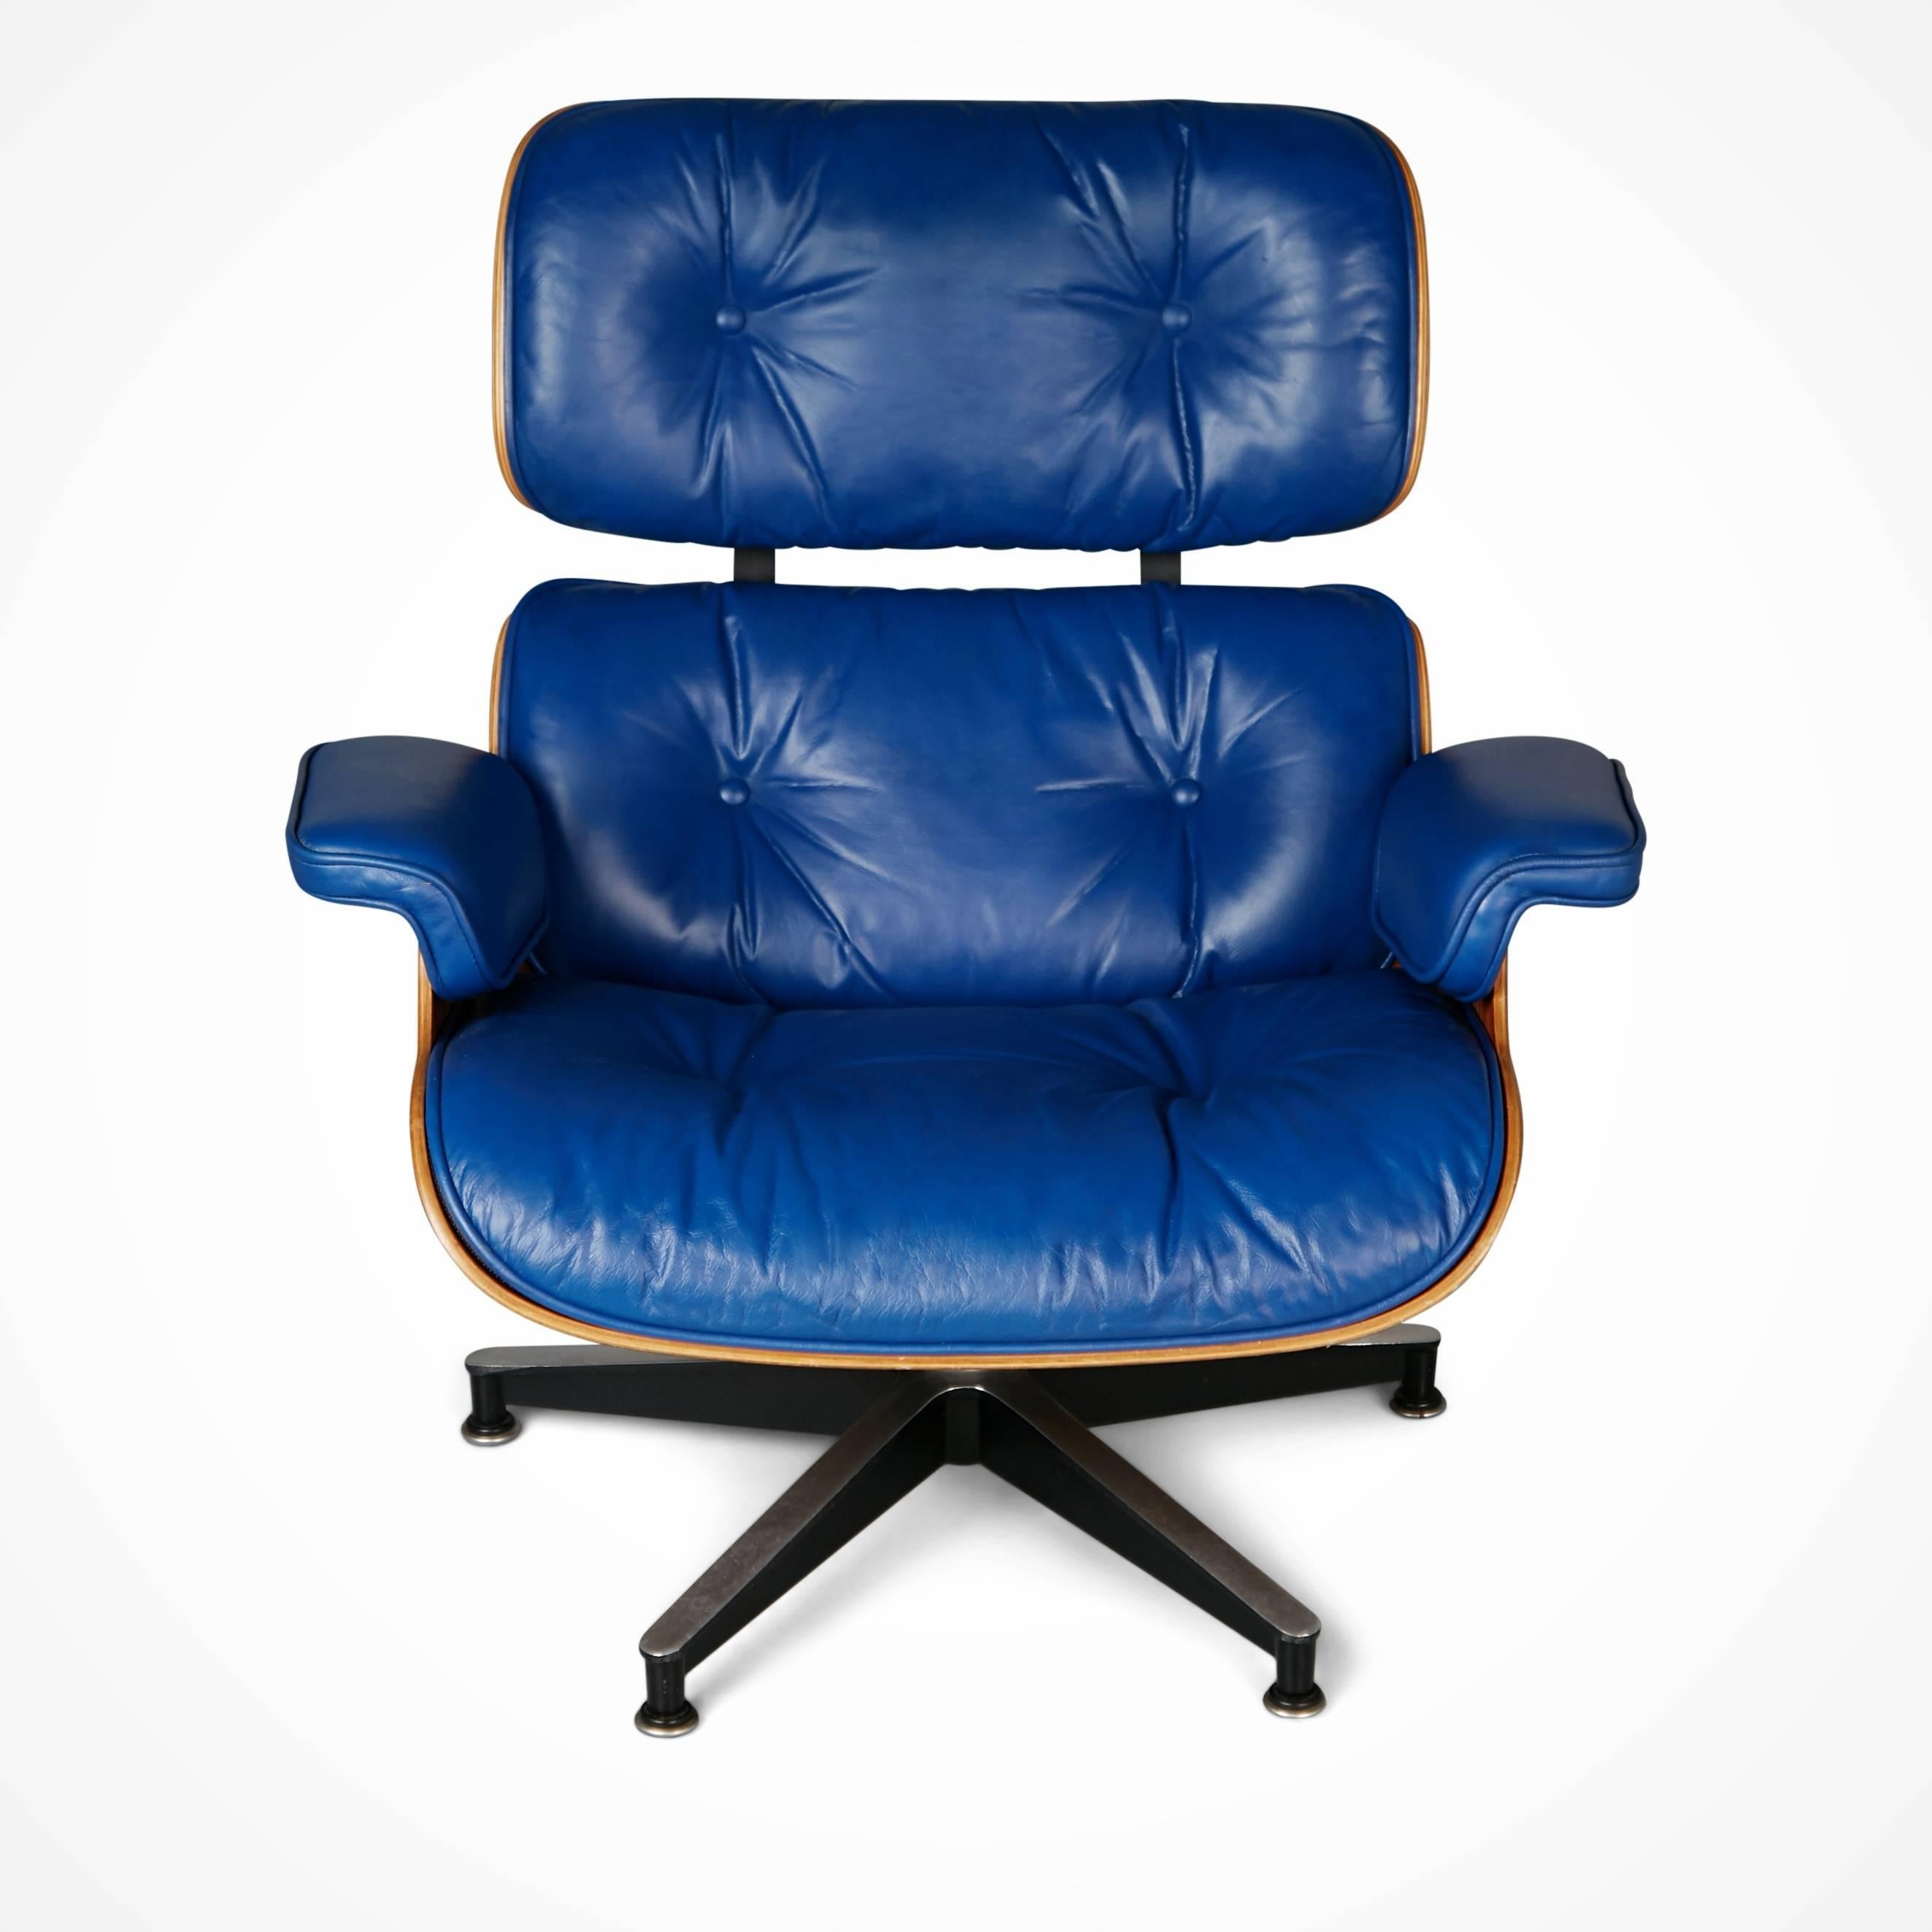 American Blue Leather and Rosewood Eames Lounge Chair 670 for Herman Miller, circa 1960